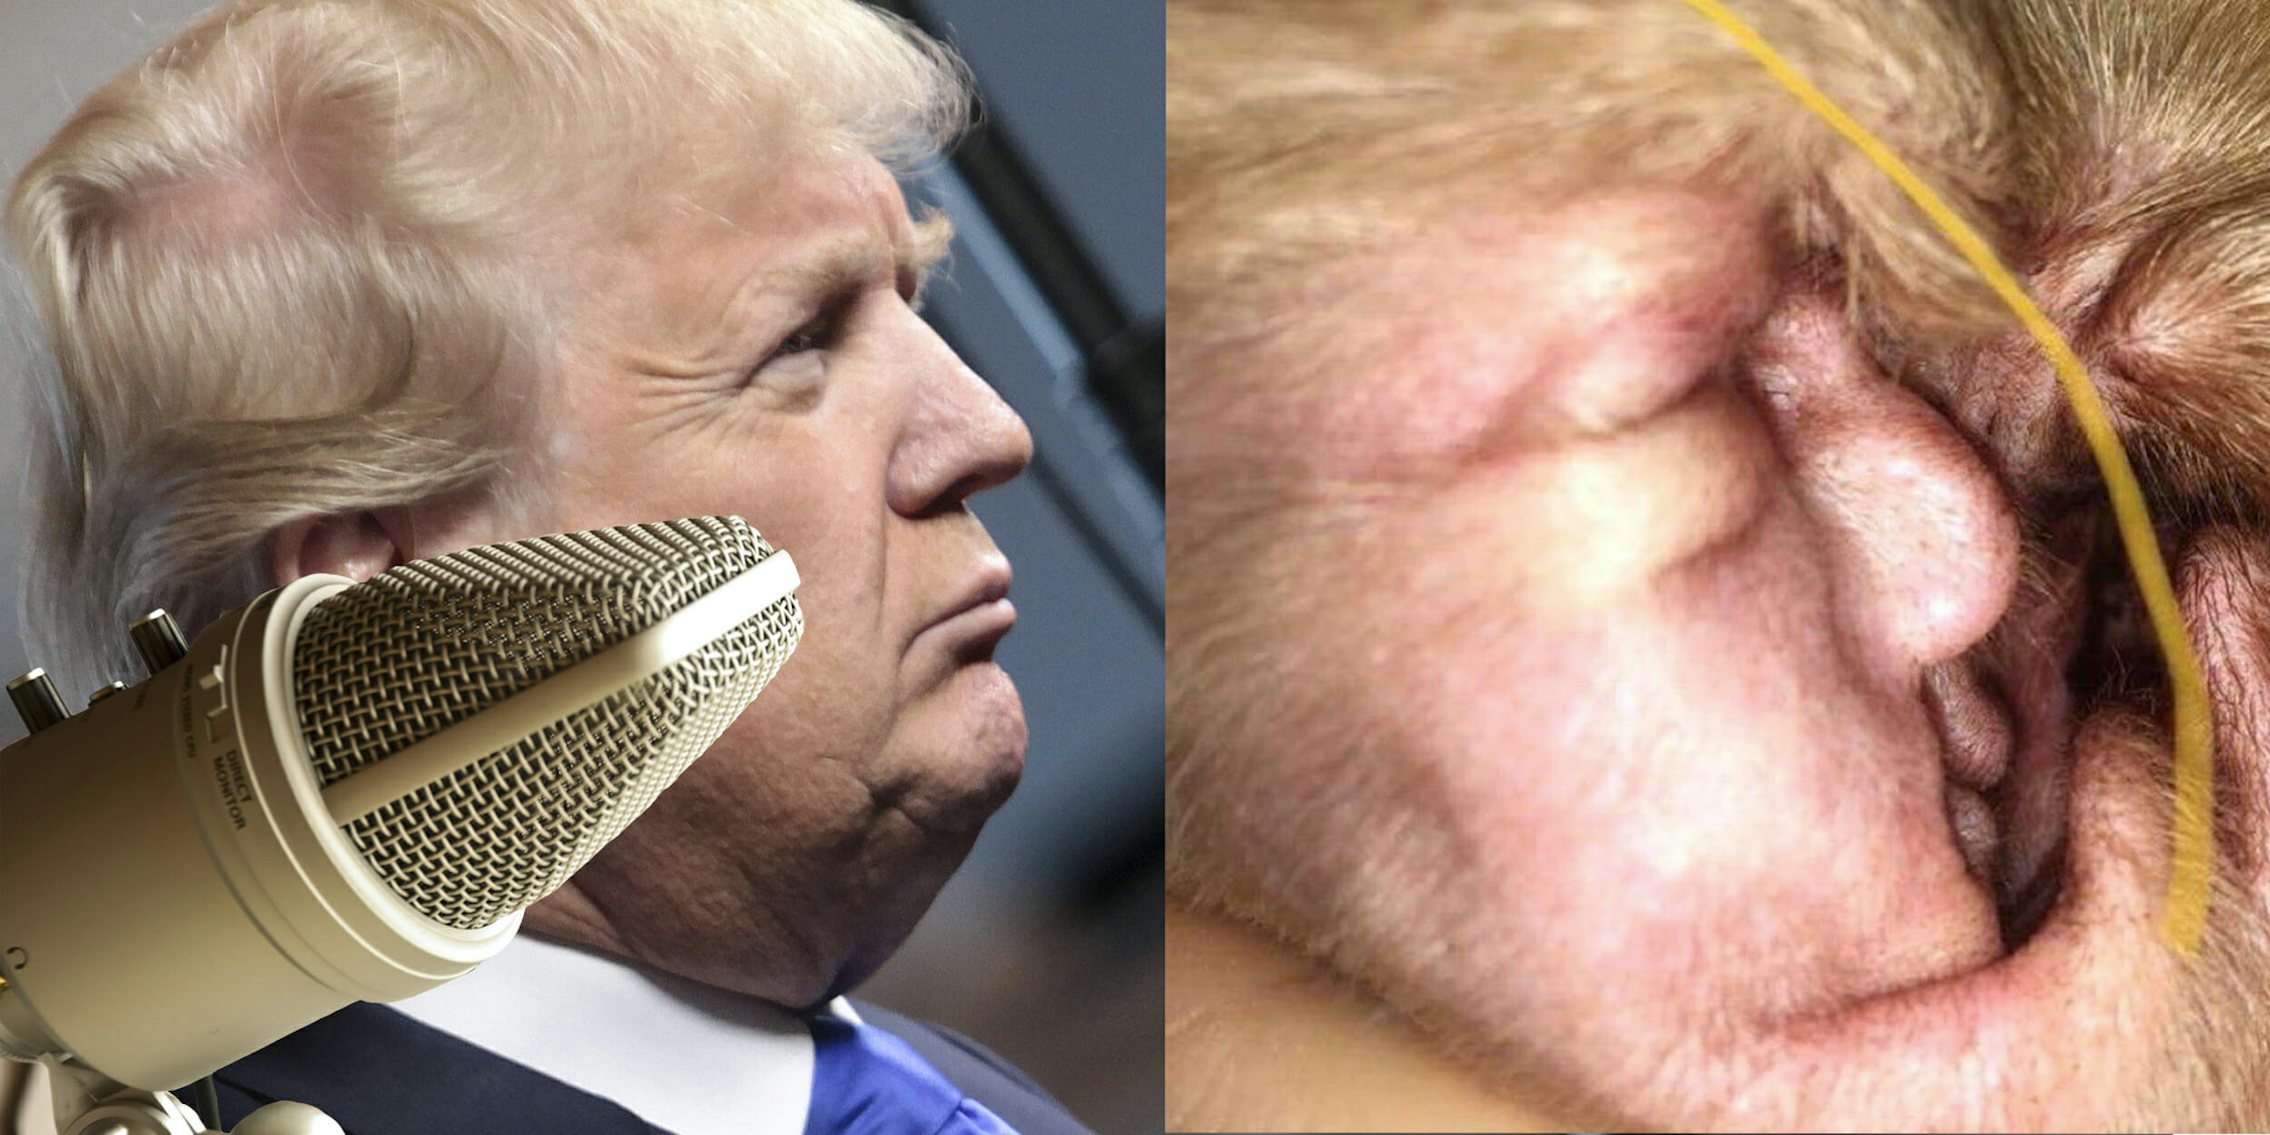 We're All Gonna Die podcast discusses Donald Trump looking like a cyst in a dog's ear